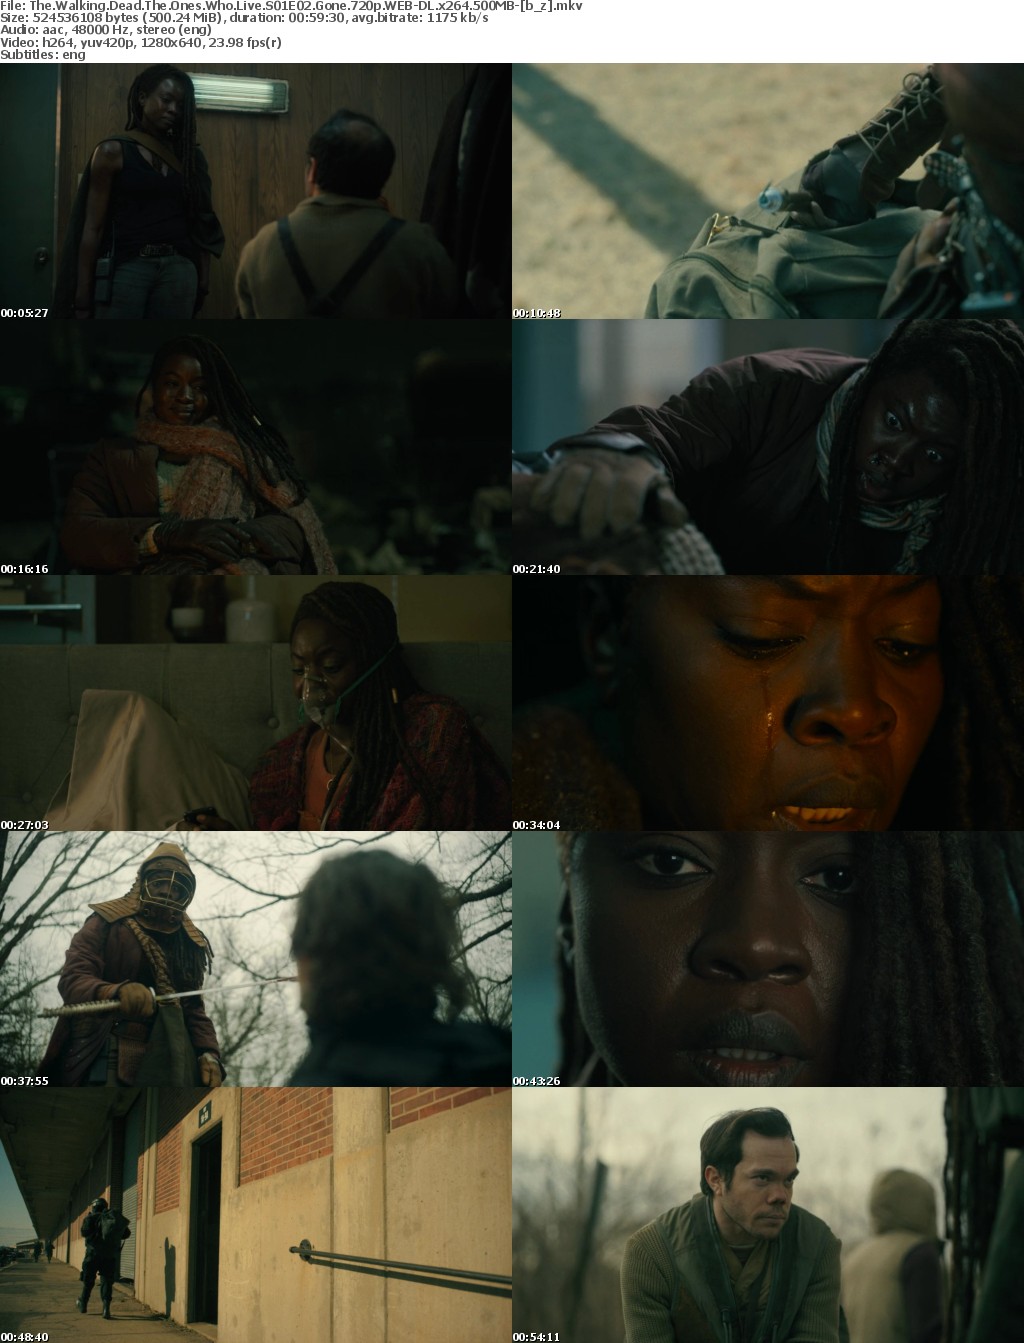 The Walking Dead The Ones Who Live S01E02 Gone 720p WEB-DL x264 500MB- b z mkv